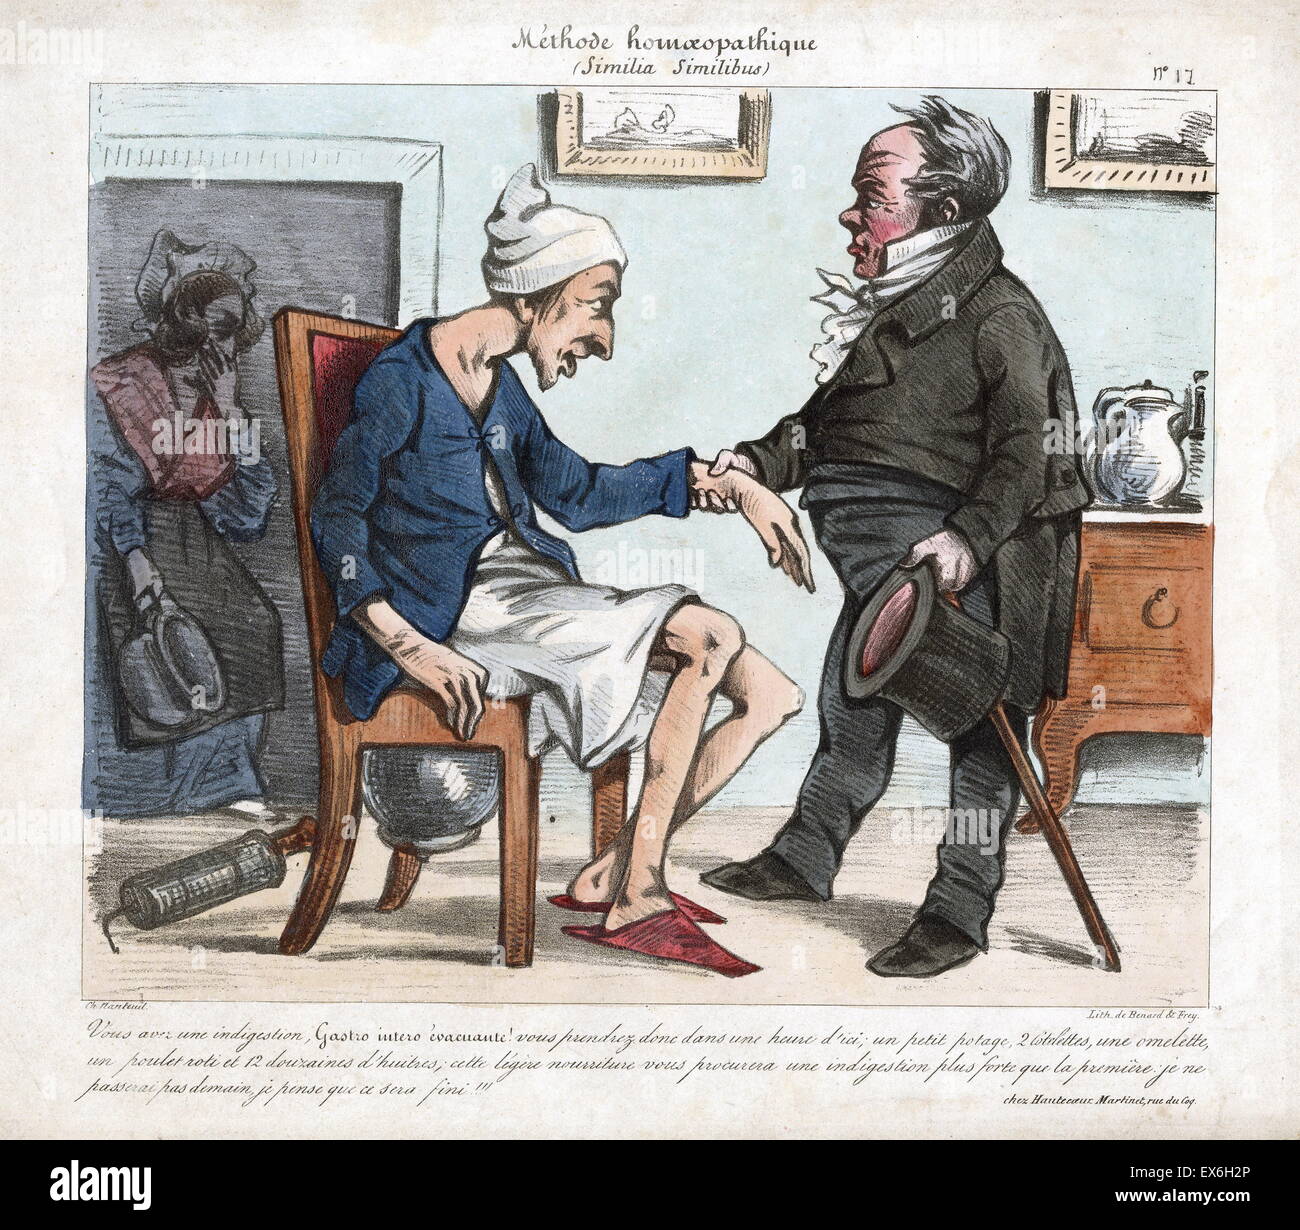 Samuel Hahnemann (1755-1843) who was a German physician and the founder of Homeopathy. Satiric print by Ch. Nanteuil entitled 'Méthode homœopathique (similia similibus)' Stock Photo